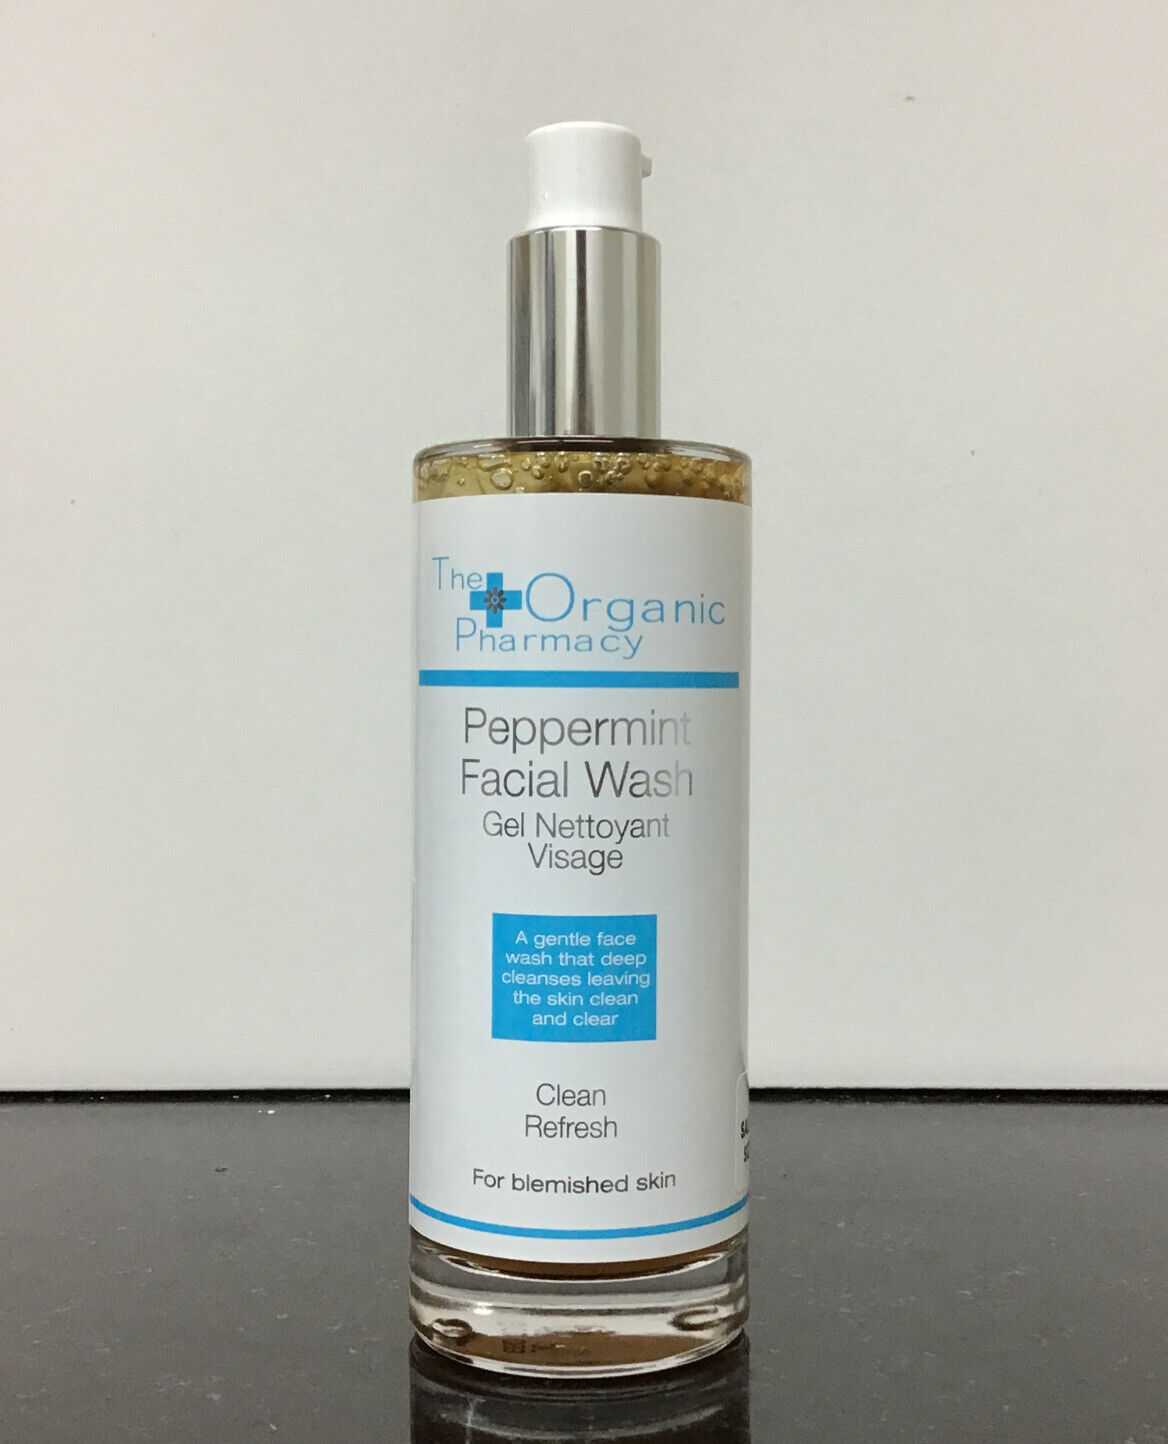 The Organic Pharmacy - Peppermint facial wash for blemished skin - 3.3 Oz 